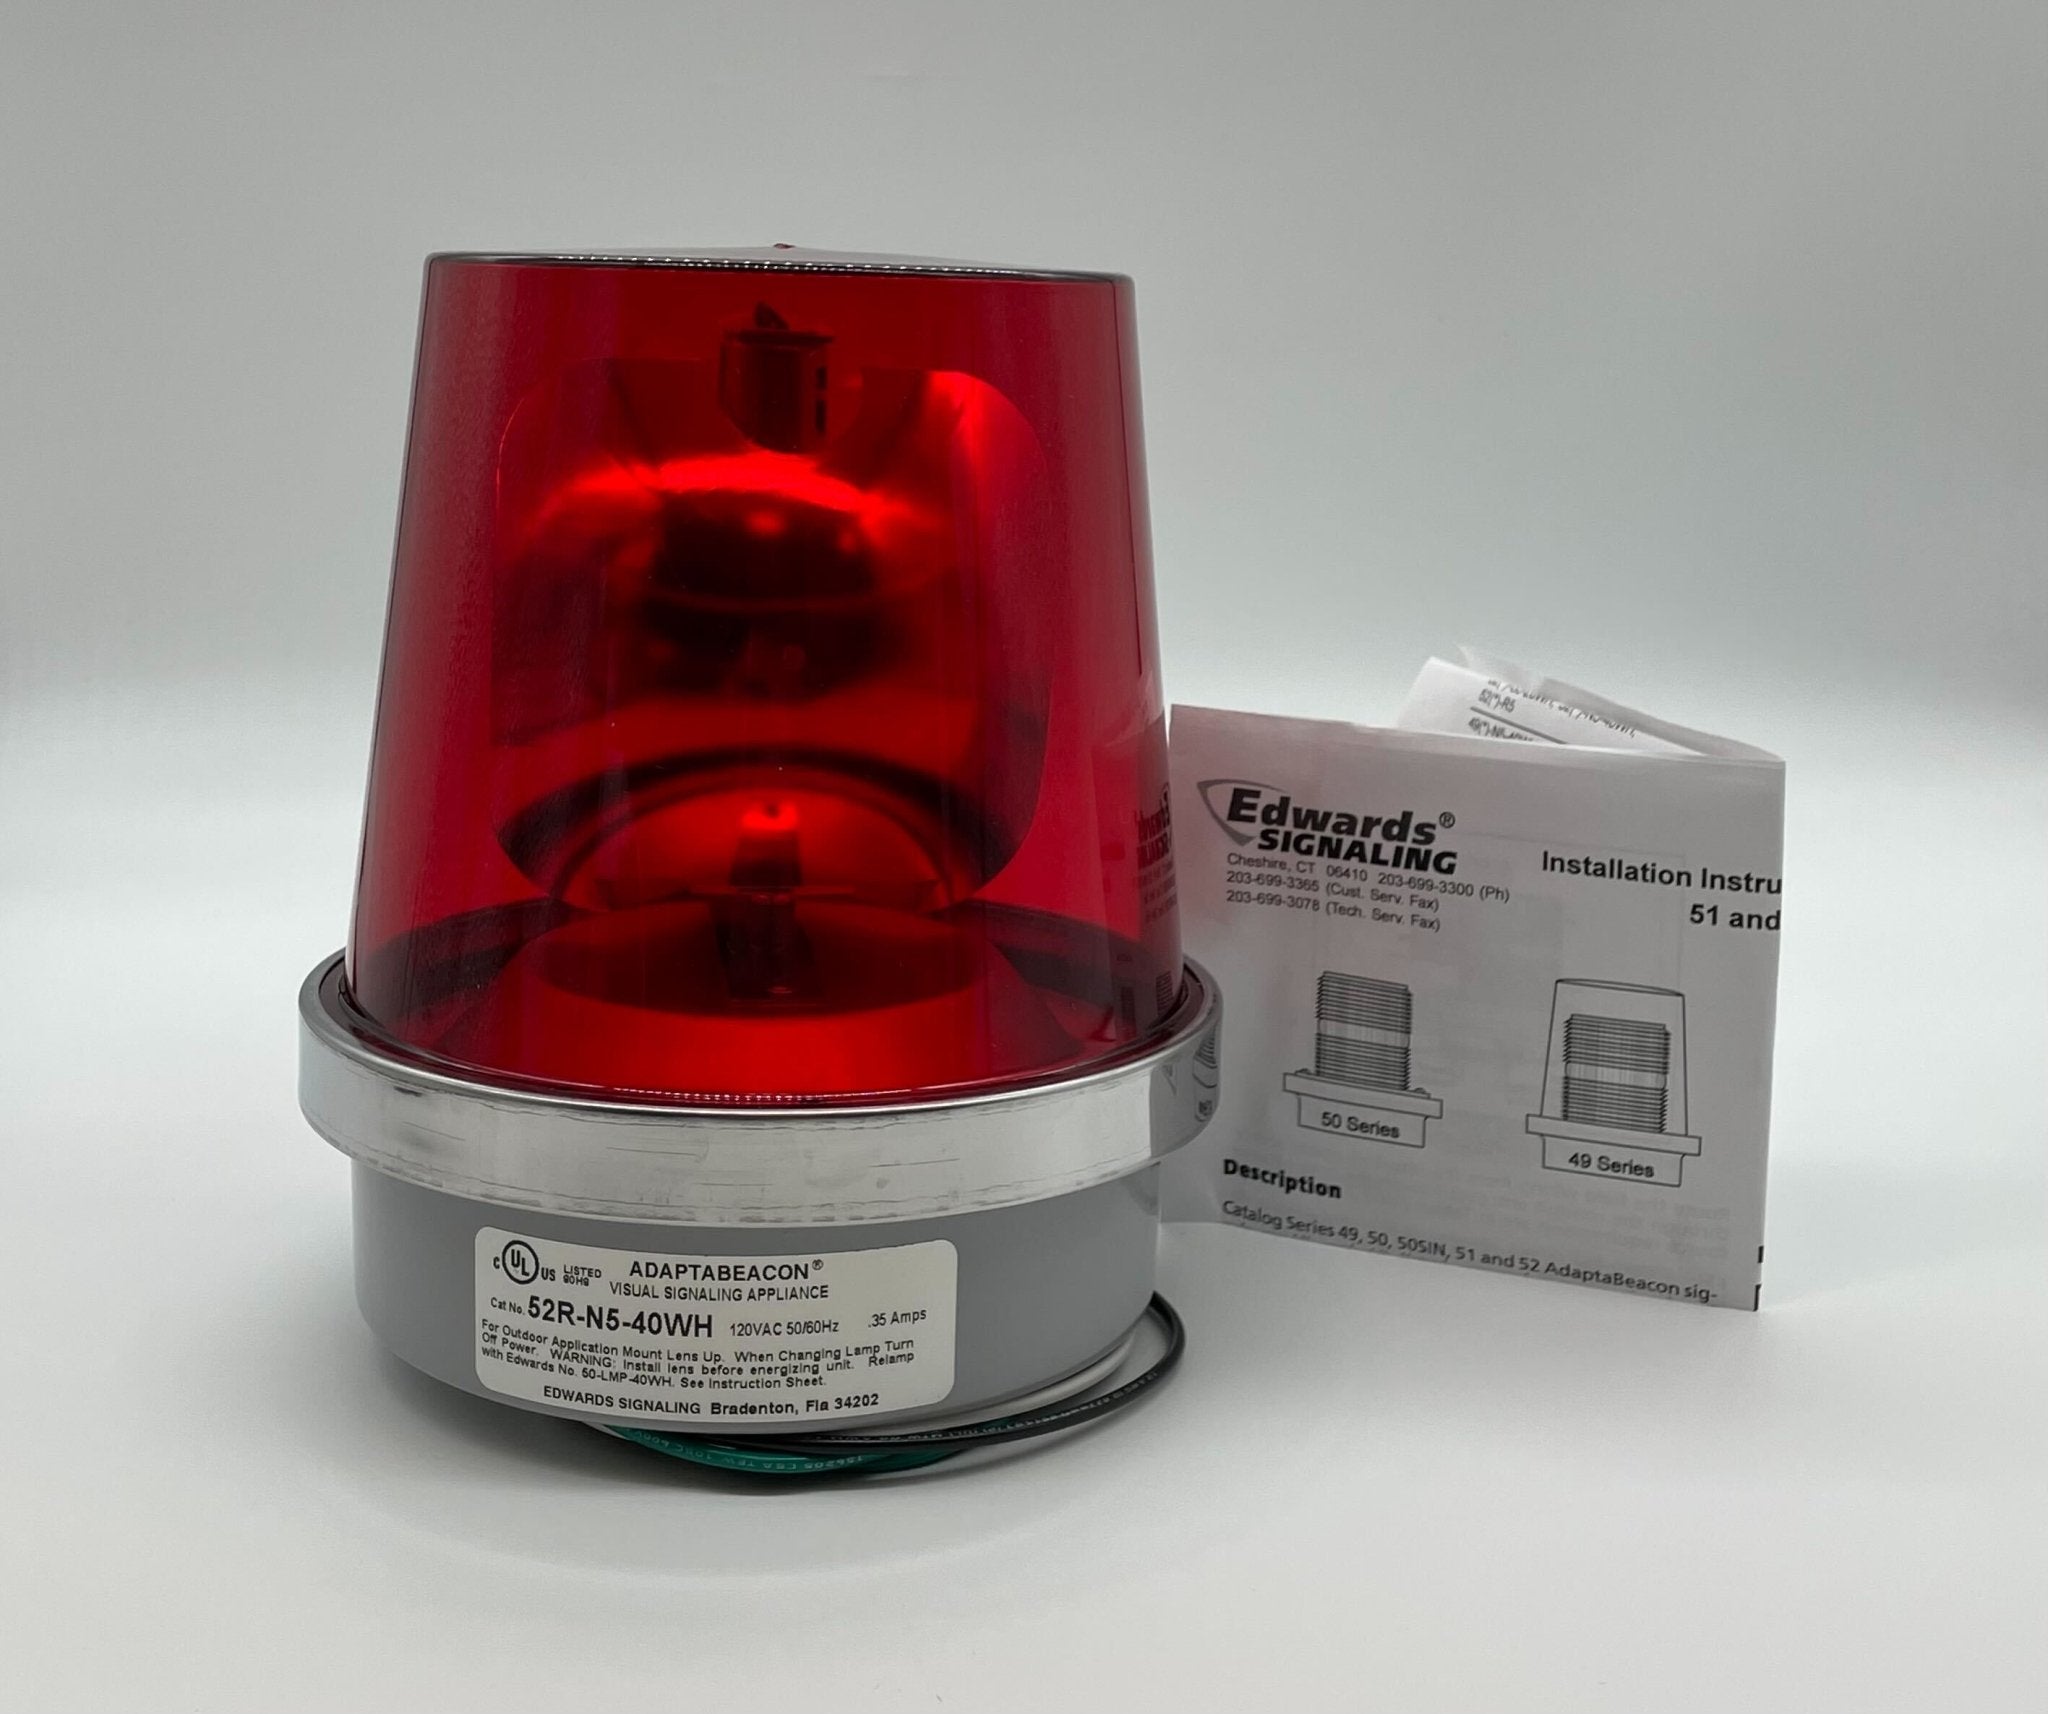 Edwards 52R-N5-40WH - The Fire Alarm Supplier